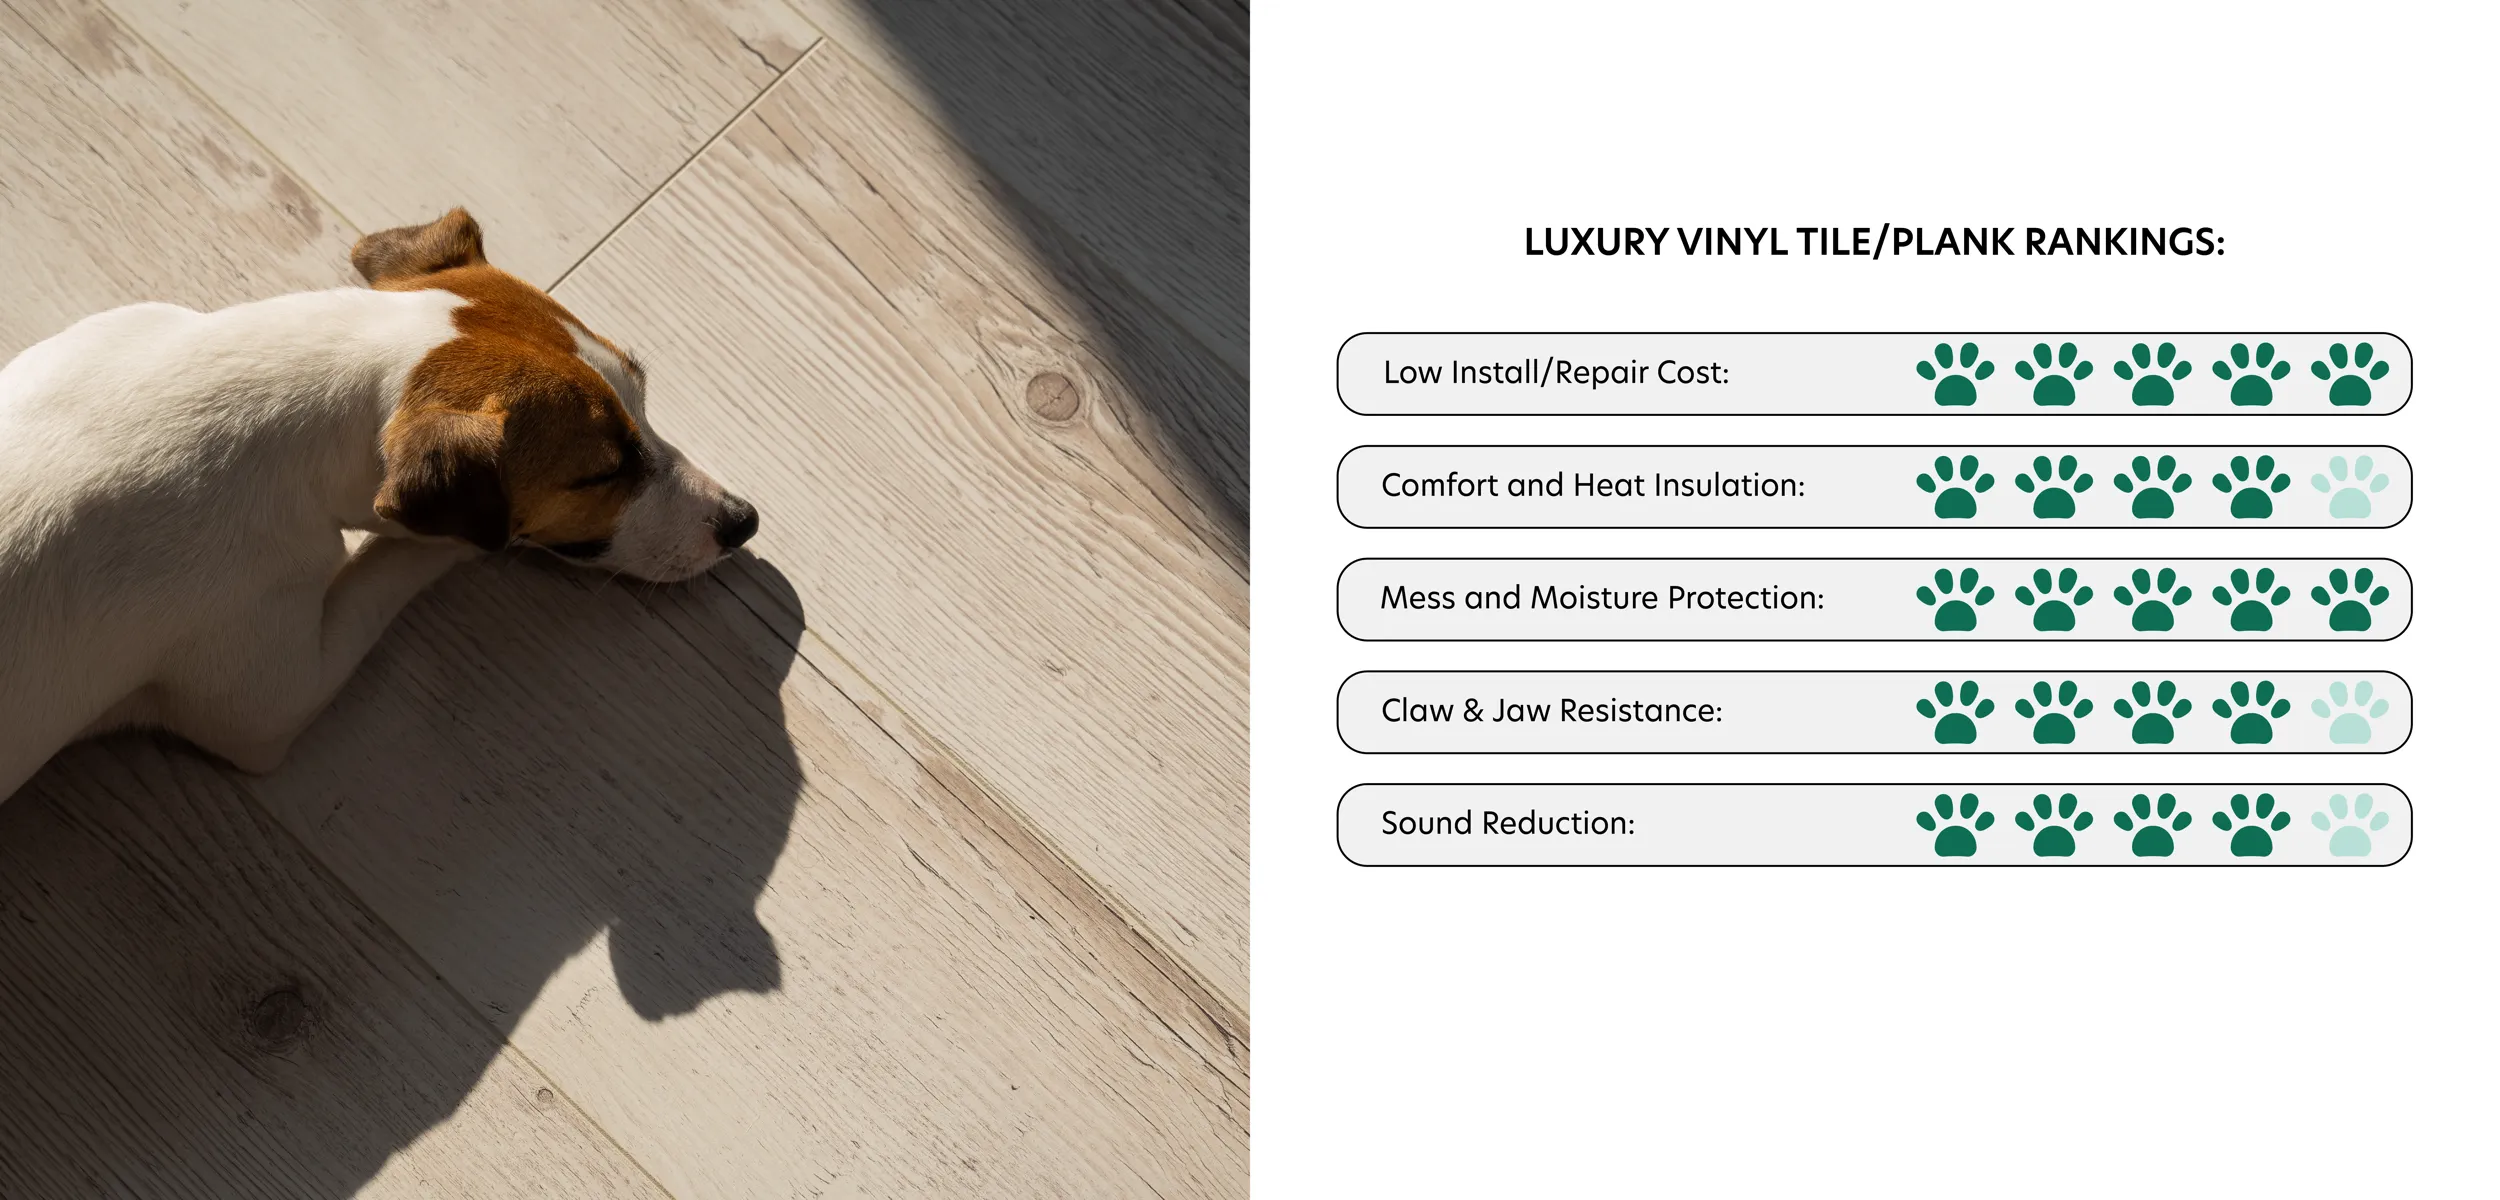 Sleeping dog resting on LVP flooring. Luxury Vinyl Plank rankings in best flooring for pets. Low Install/Repair Cost: 5 Paws. Comfort and Heat Insulation: 4 Paws. Mess and Moisture Protection: 5 Paws. Claw & Jaw Resistance: 4 Paws. Sound Reduction: 4 Paws.